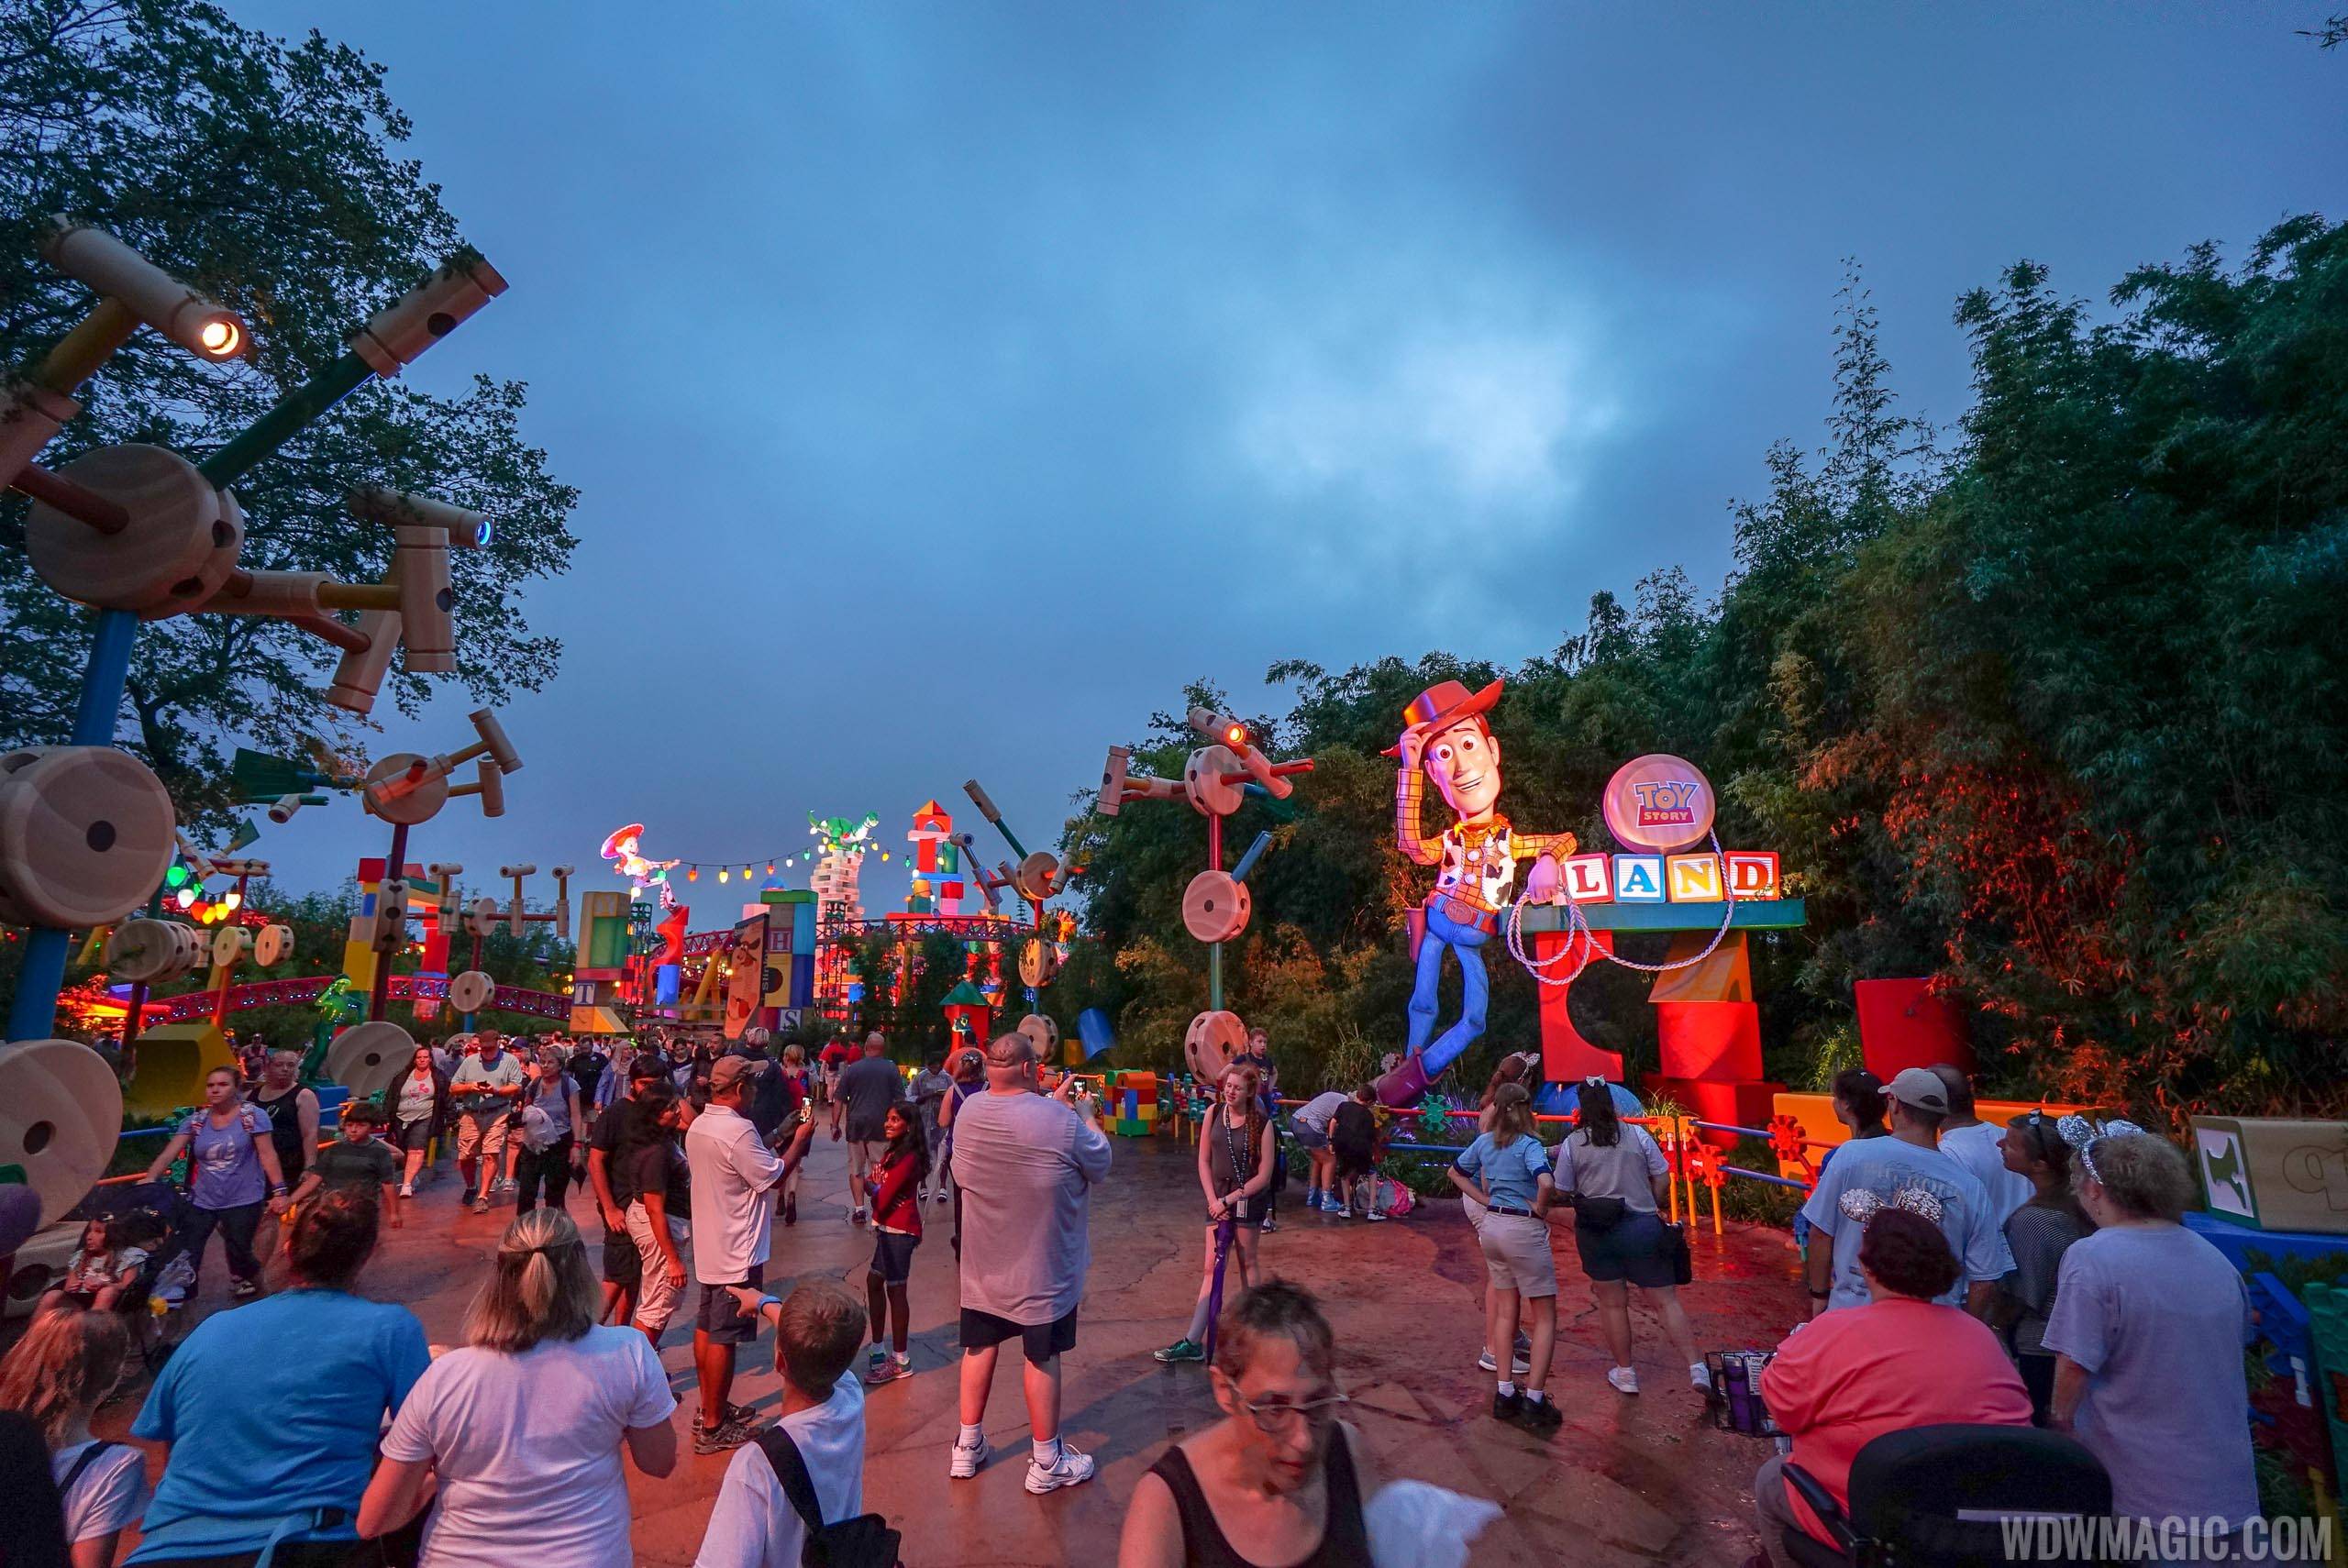 The manin entrance to Toy Story Land